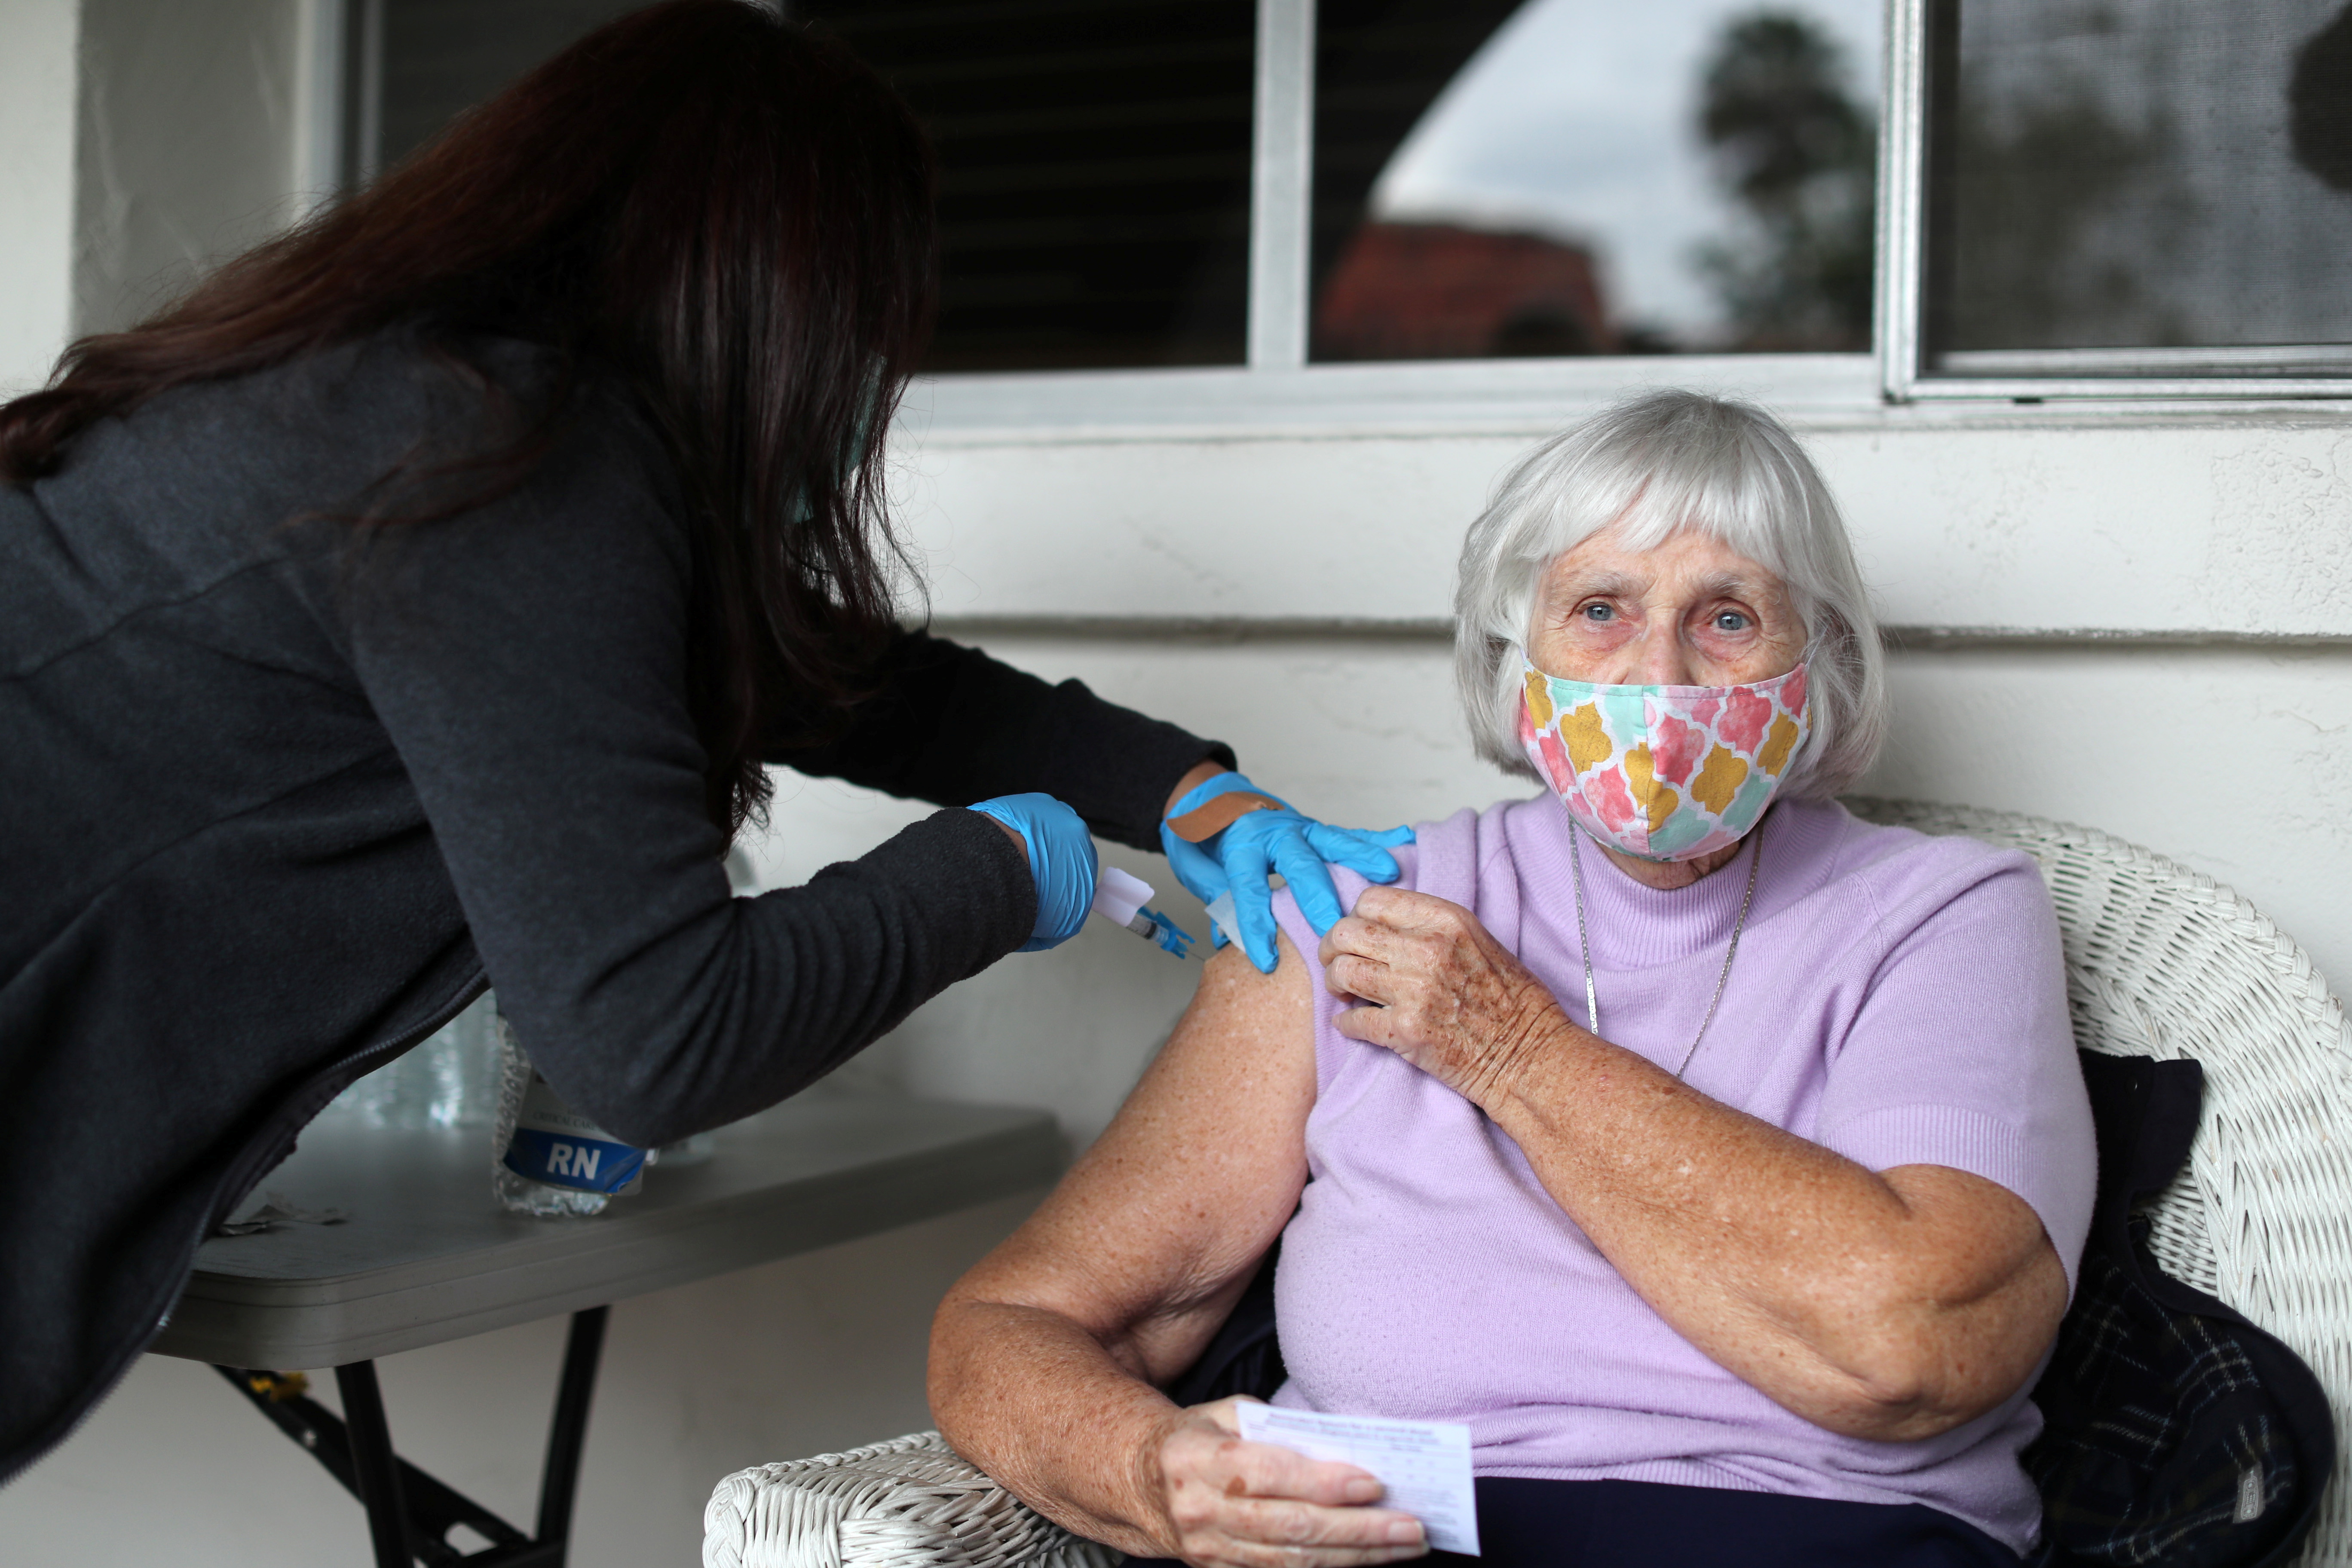 COVID-19 vaccination drive for retired nuns at the Sisters of St. Joseph of Carondelet independent living center in Los Angeles